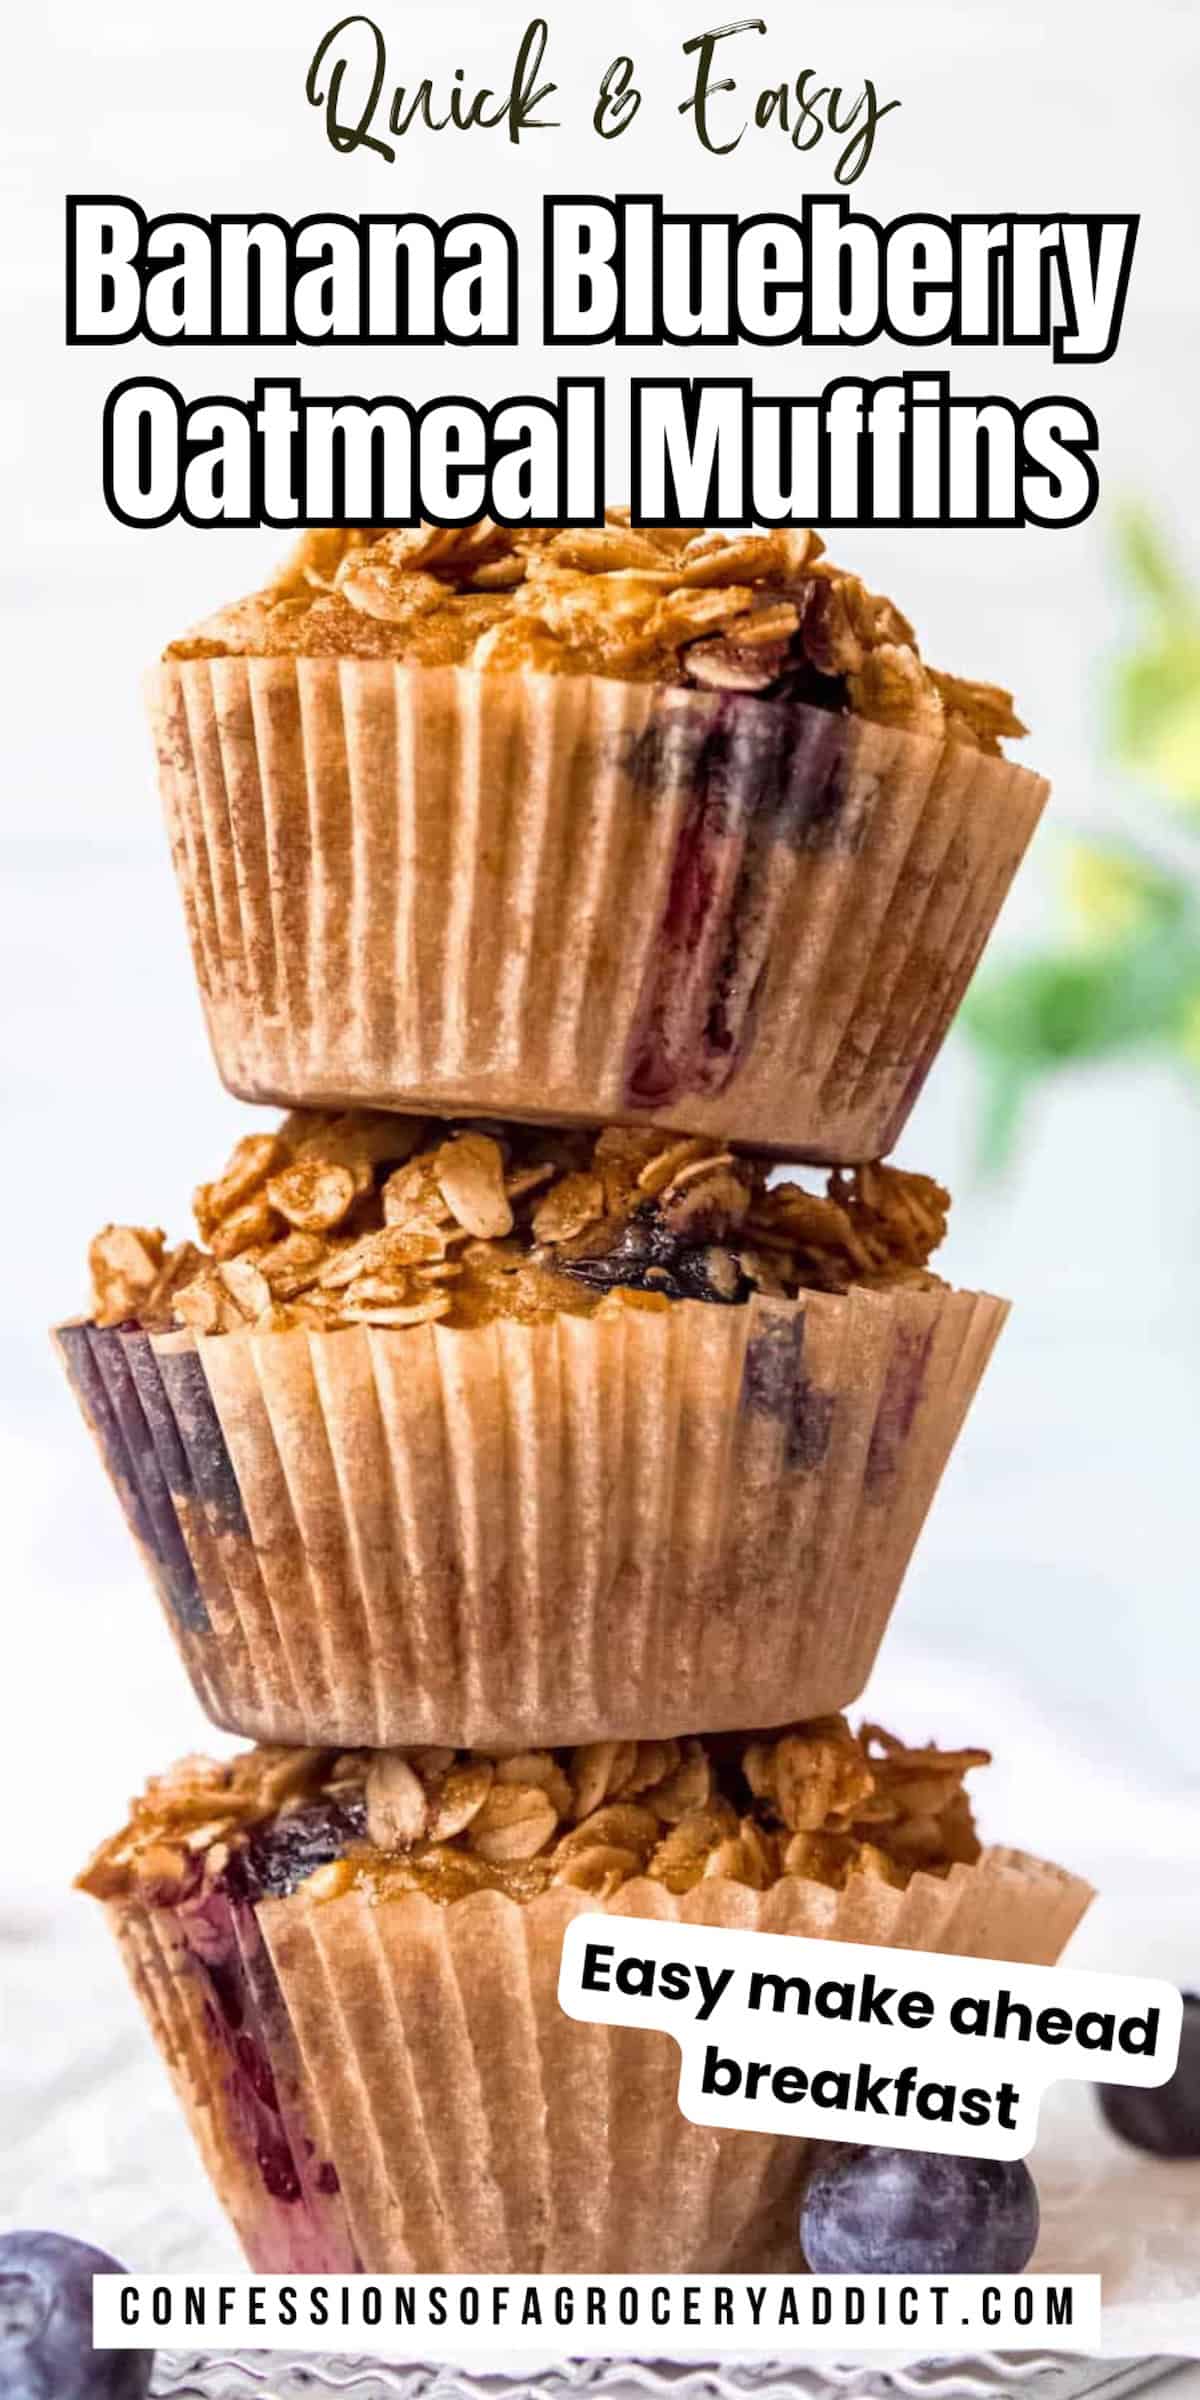 vertical pinterest pin with stack of 3 banana blueberry oatmeal muffins with text overlay that reads "quick & easy banana blueberry muffins."